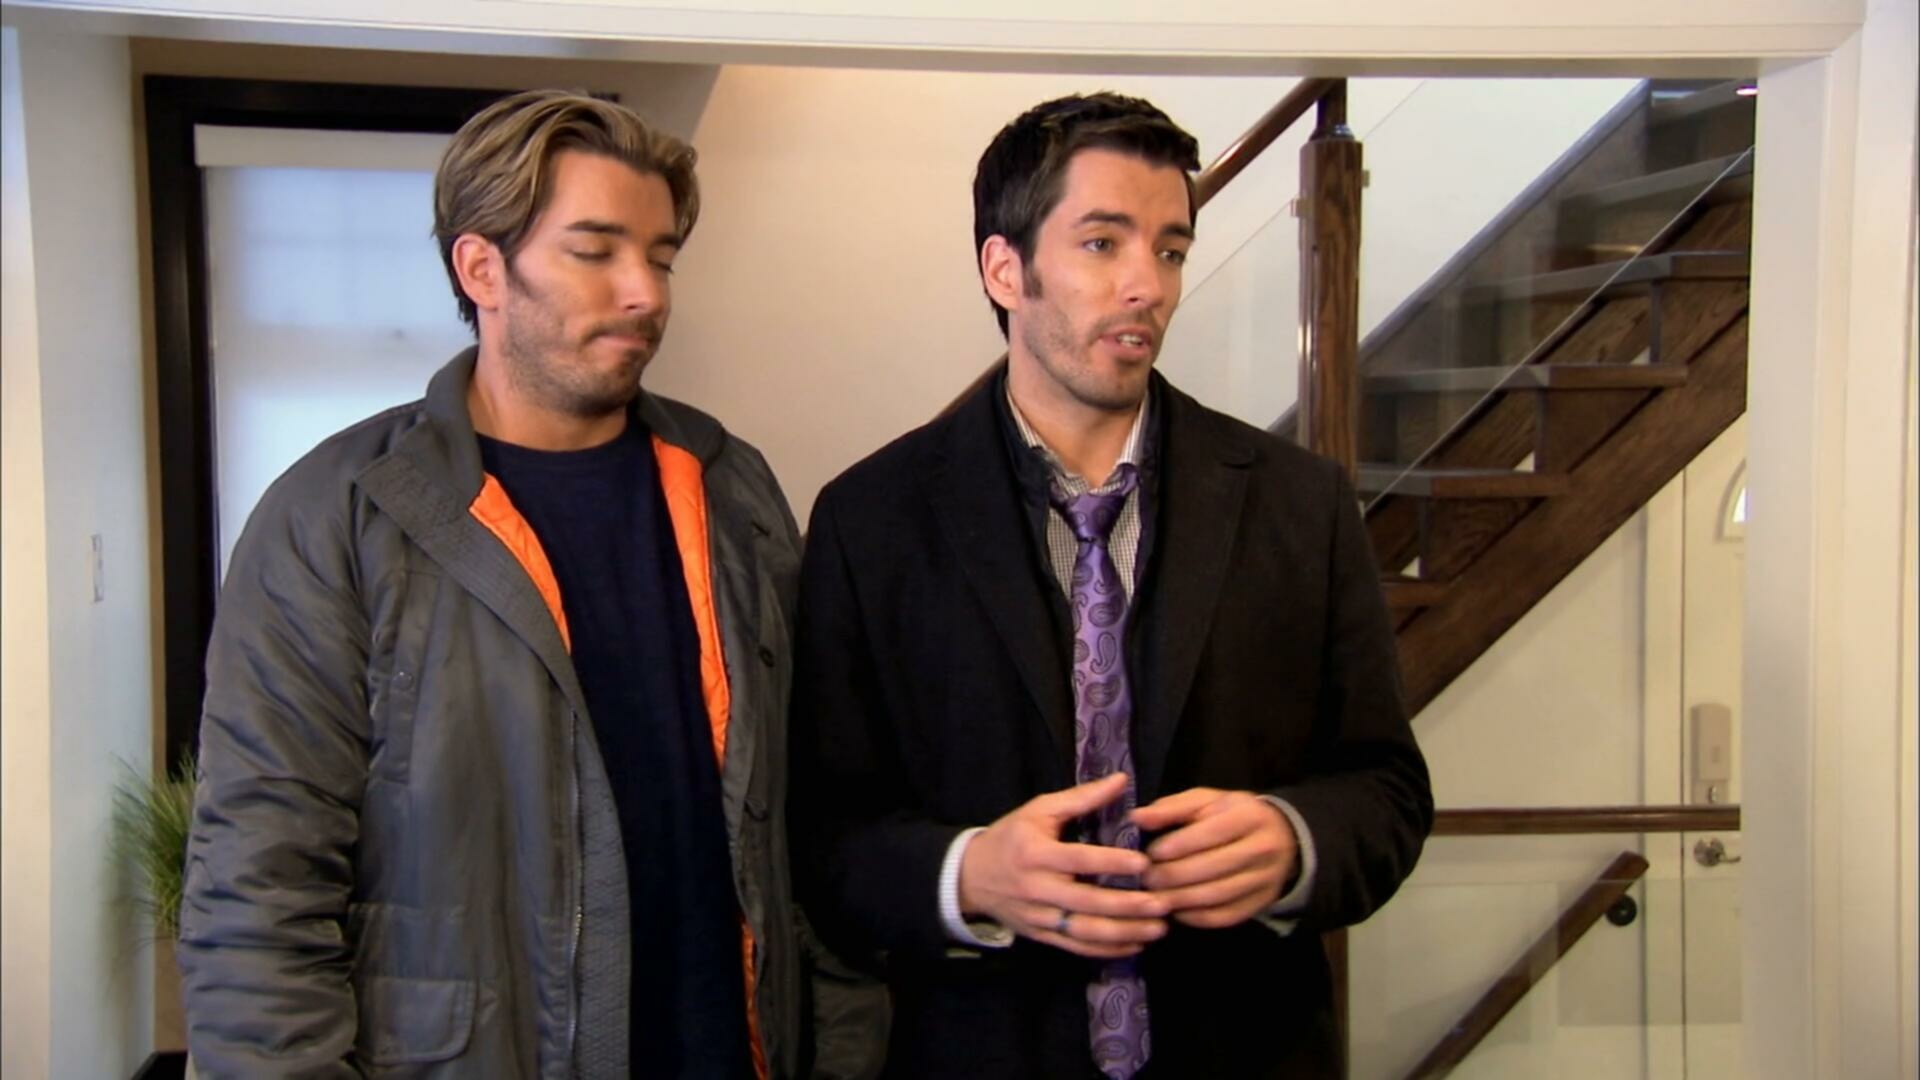 Property Brothers S01E10 Townhouse to Dream House Janice and Rob 1080p MAX WEB DL DDP2 0 H 264 NTb T